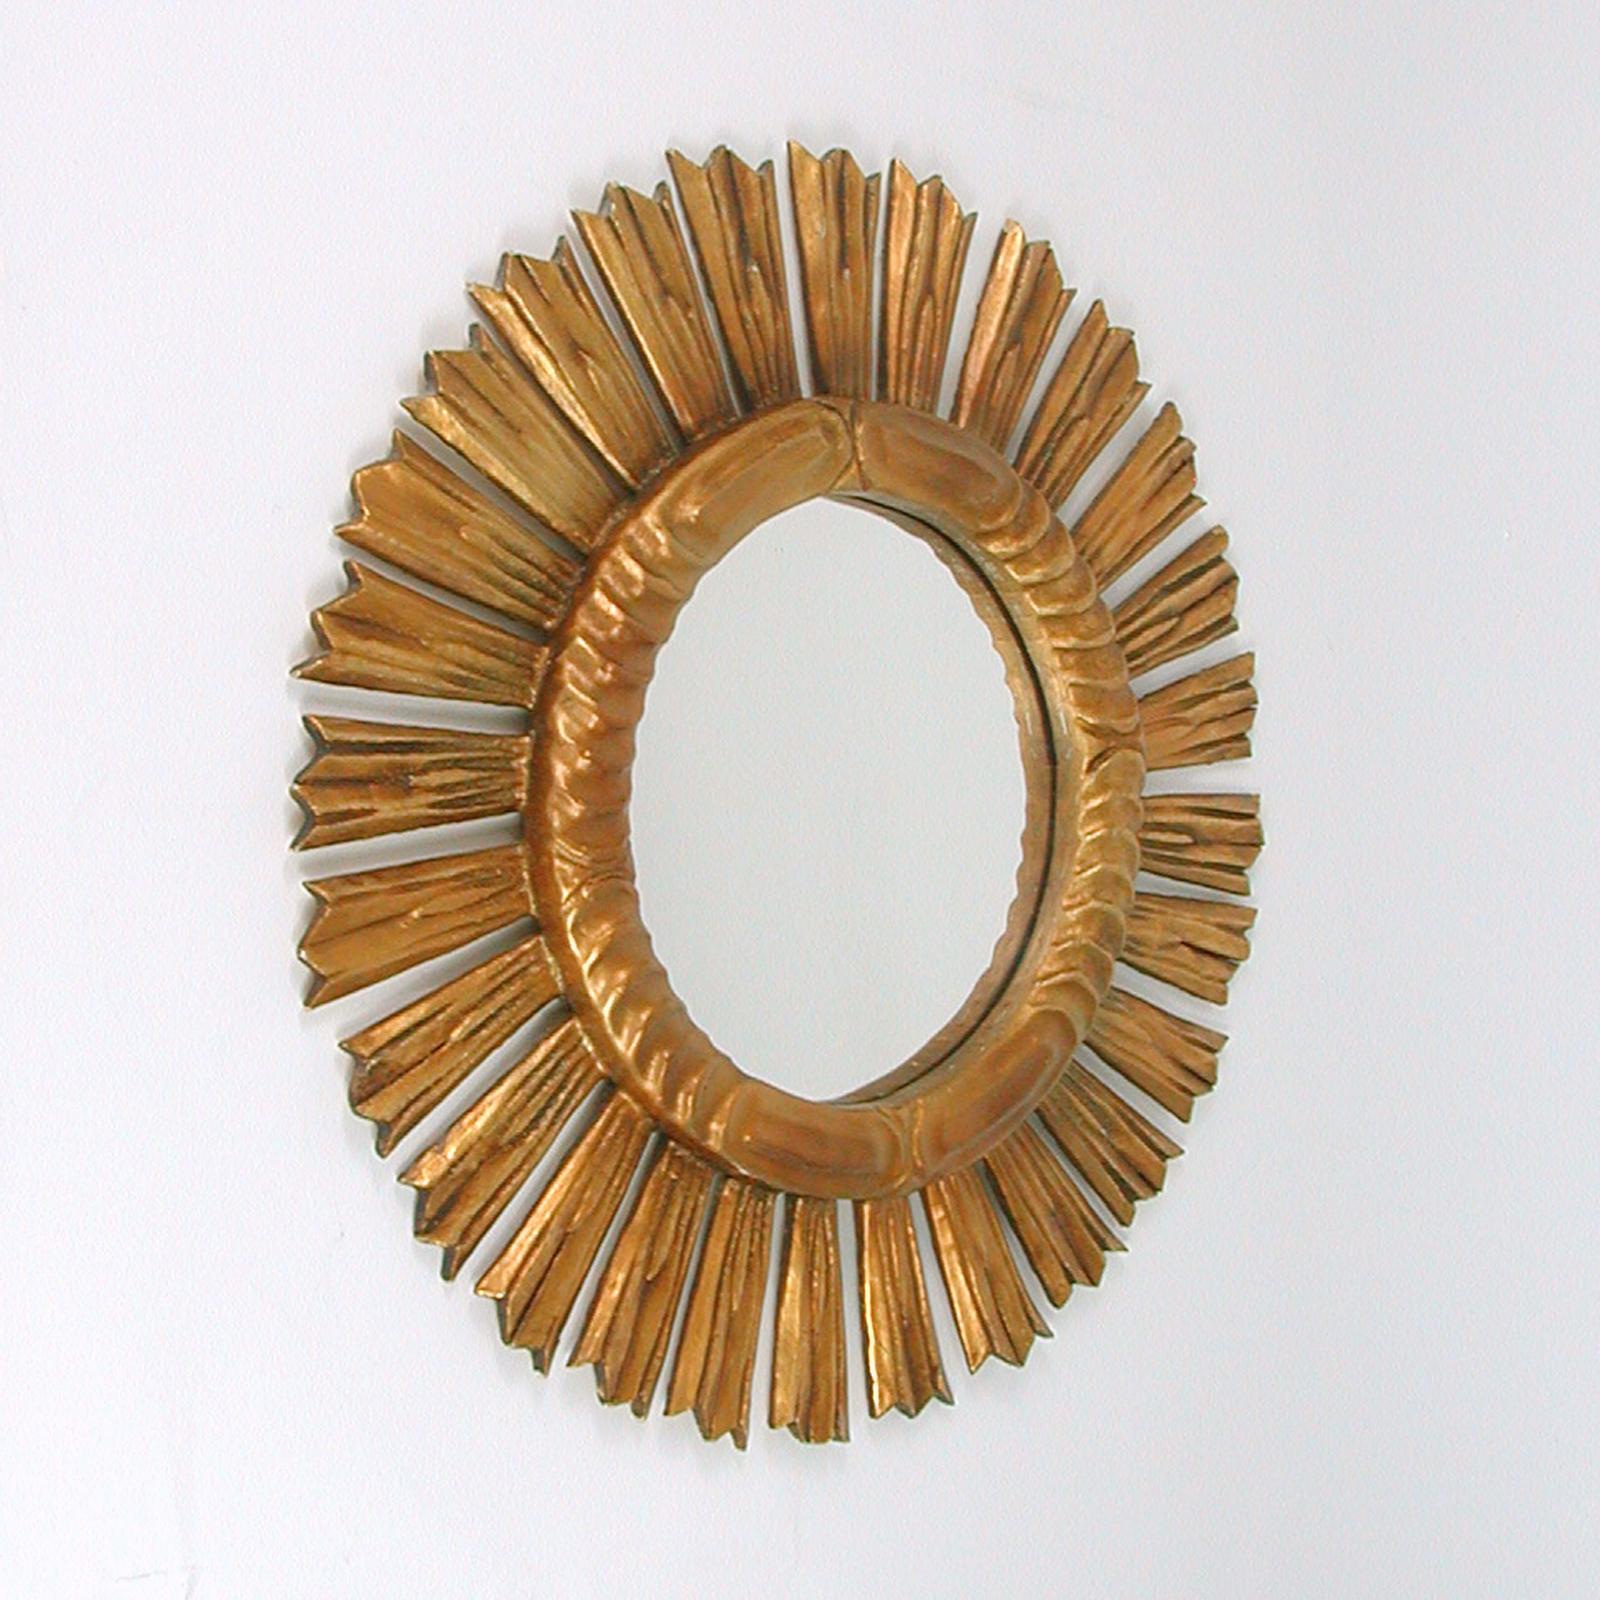 This glamorous giltwood mirror was designed and manufactured in Spain in the 1940s to 1950s. It features an original carved wooden sunburst frame and mirror glass. The frame is in very good vintage condition with a beautifully aged patina. The